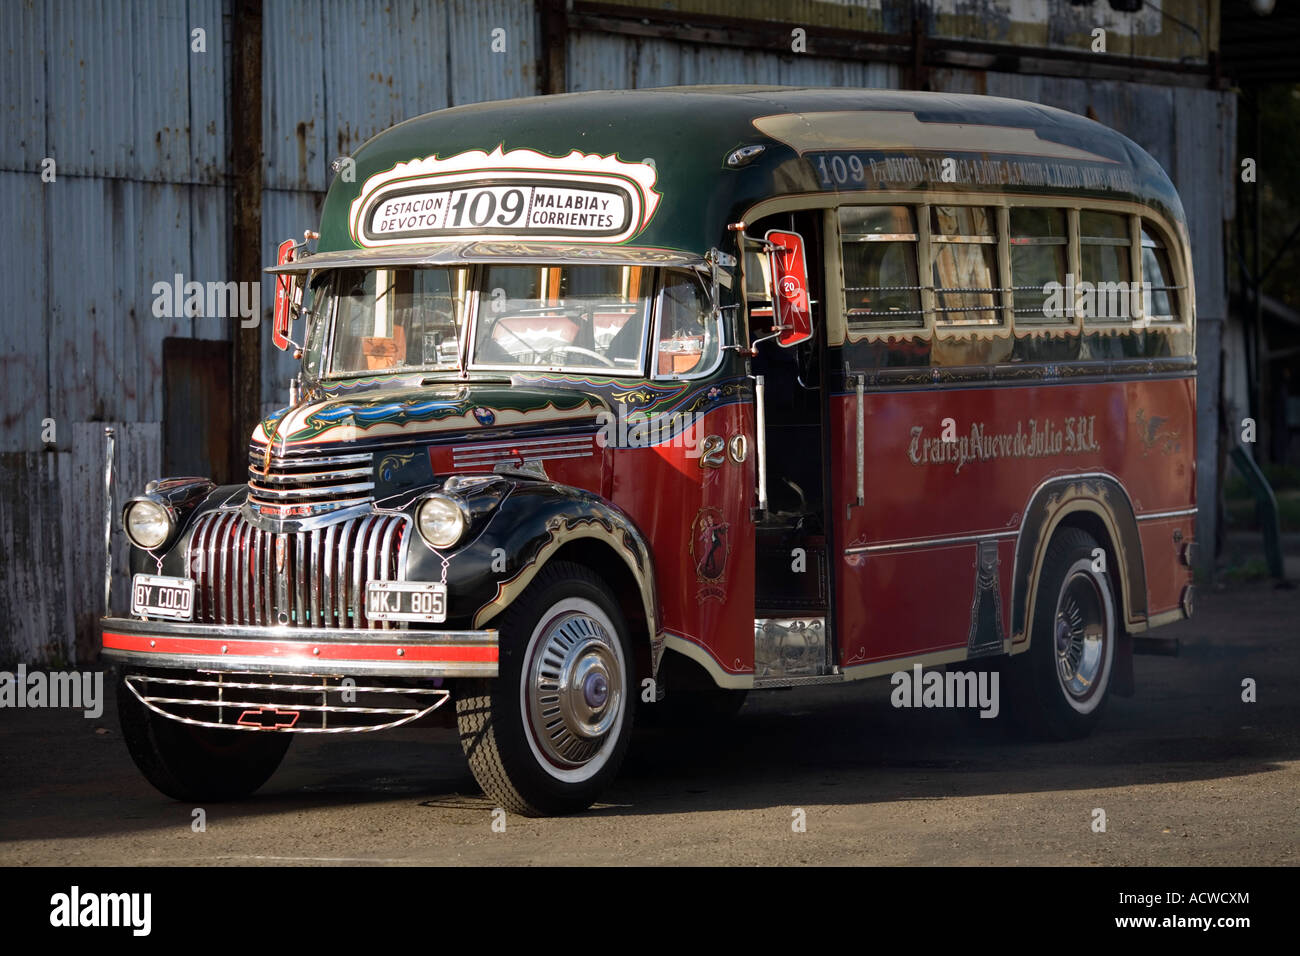 Old 1947 Colectivo Public bus Buenos Aires Argentina Stock Photo